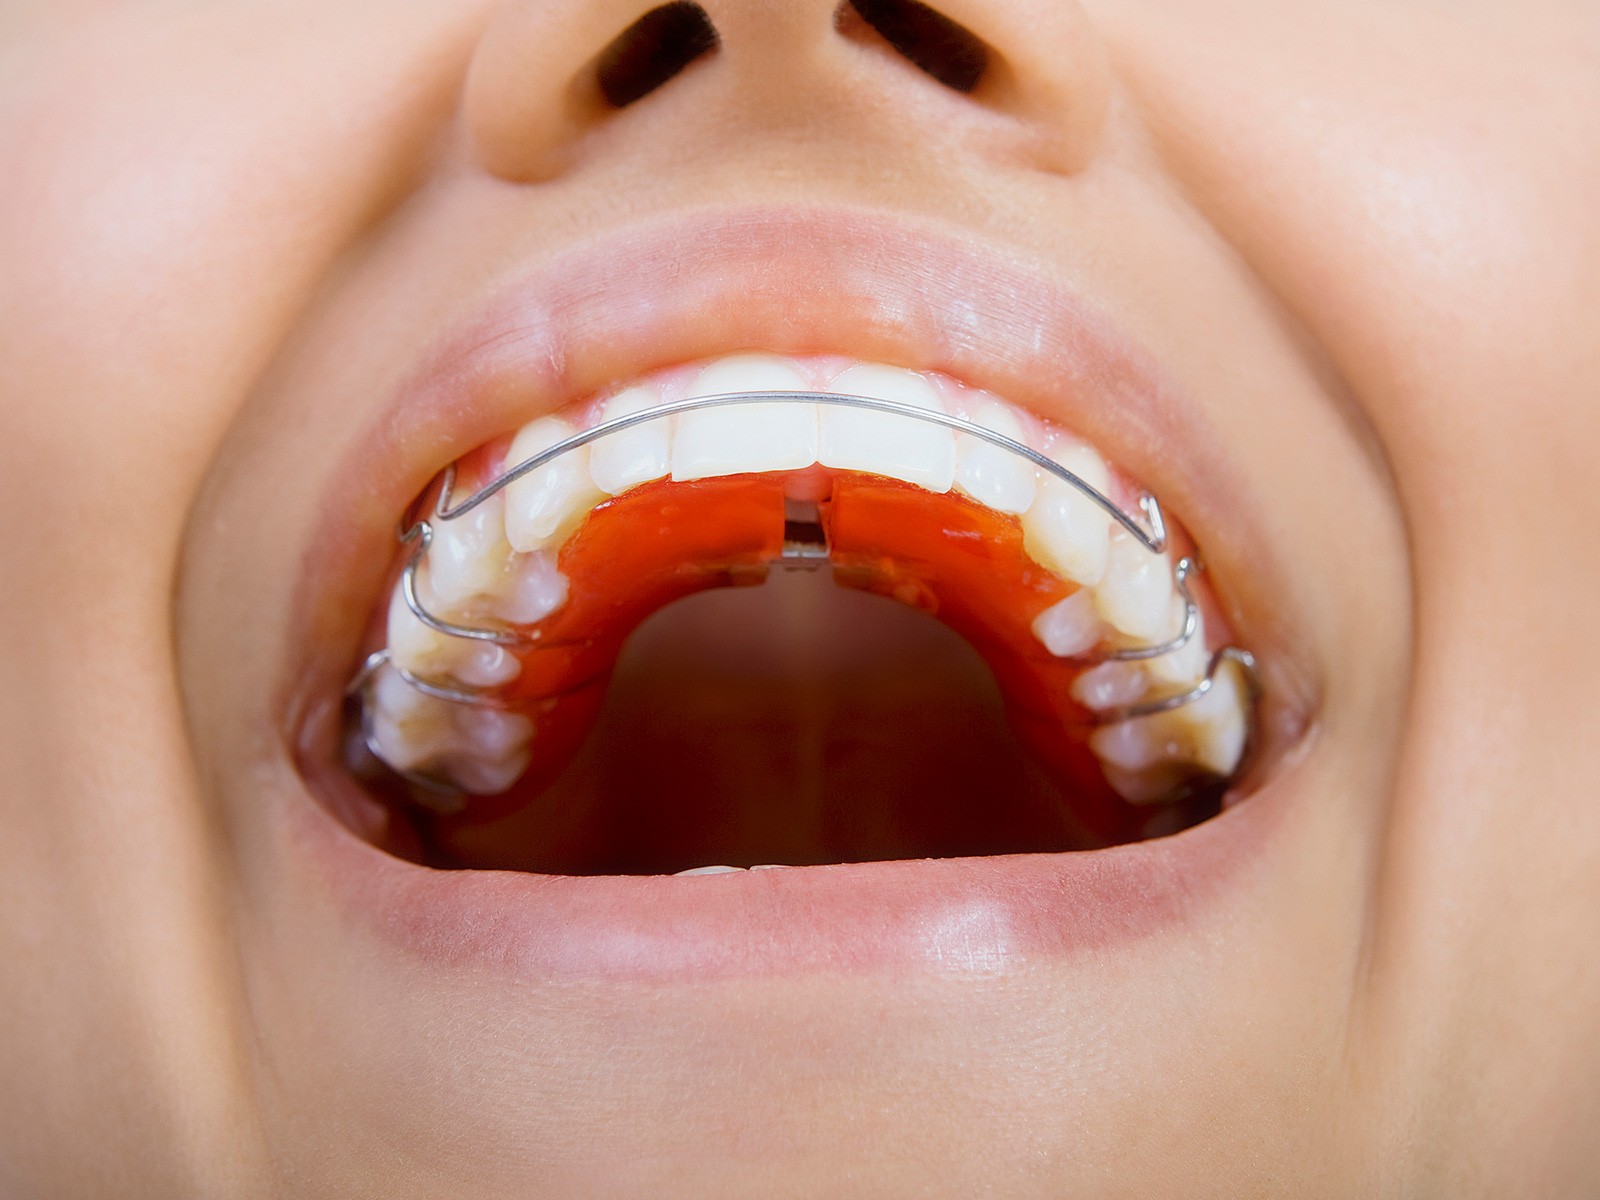 How long does it take a retainer to move teeth back?